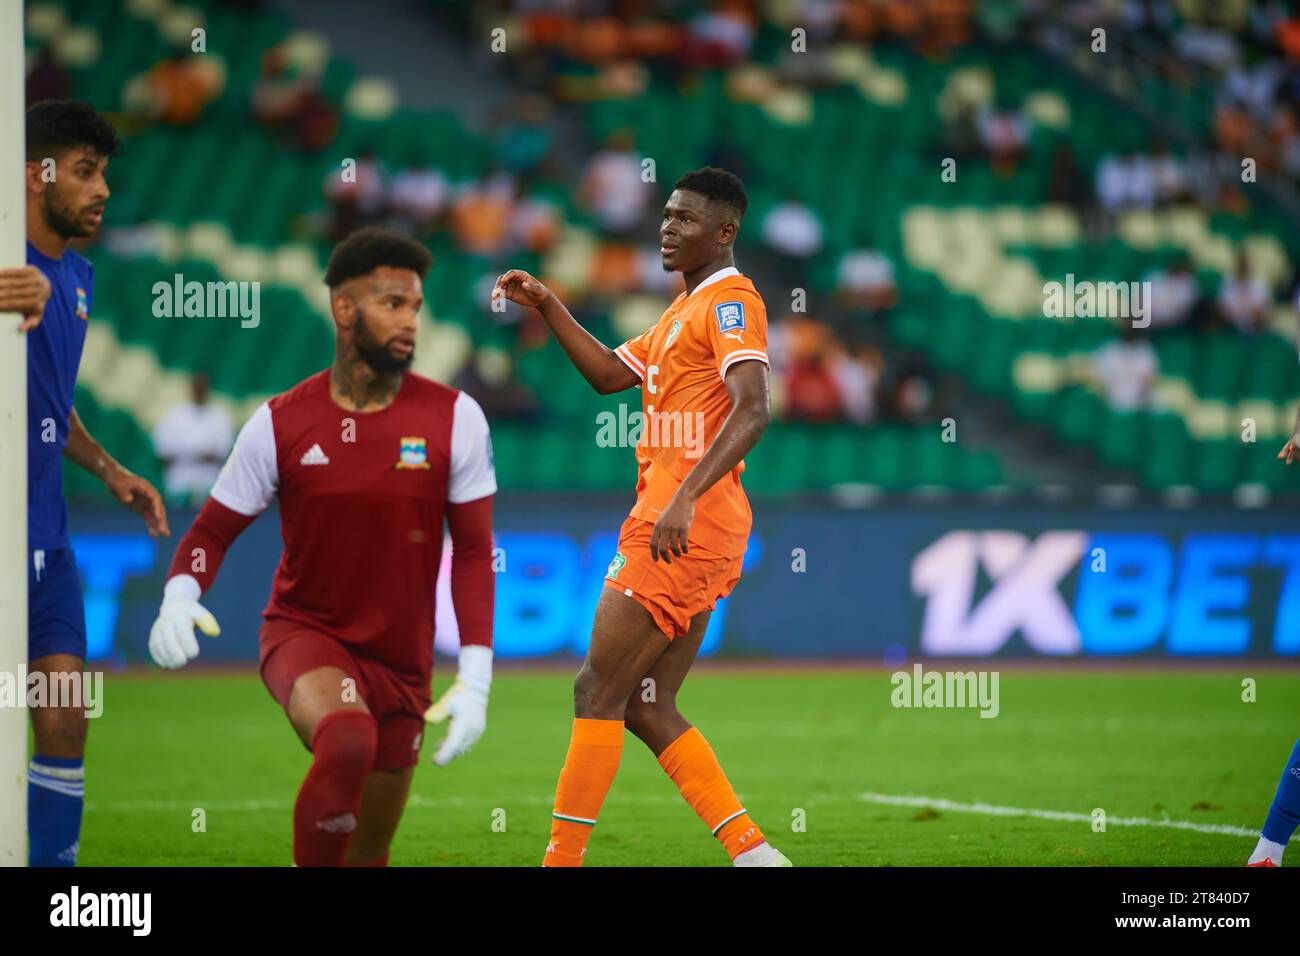 Carlos Siméon after a save to prevent the Ivorian goal Stock Photo